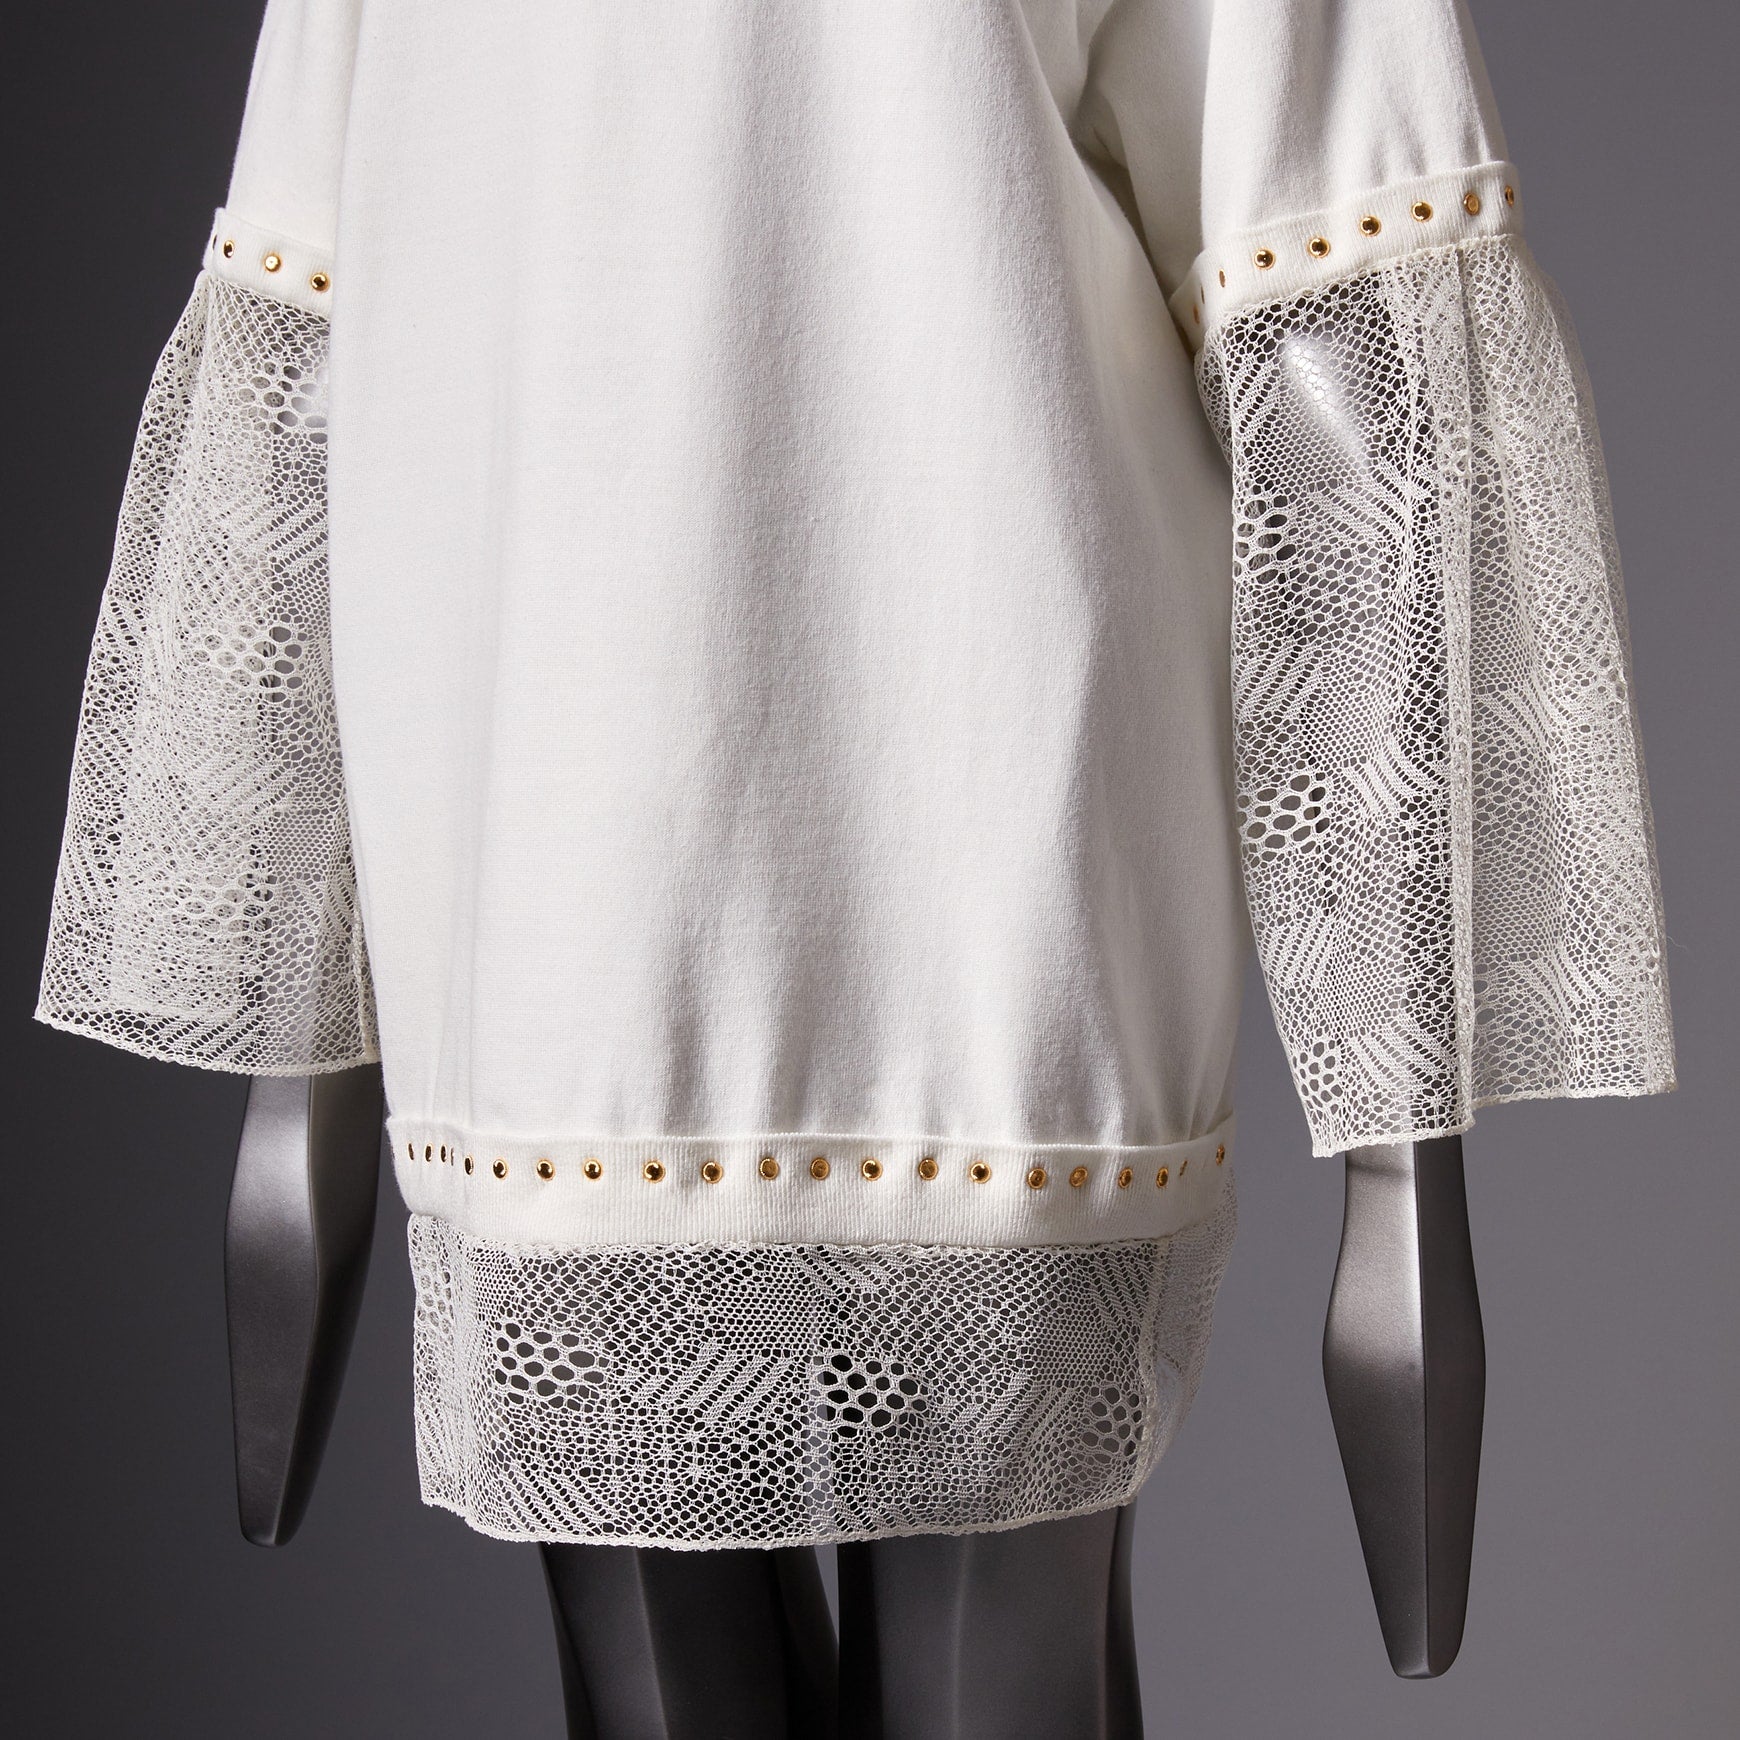 TYPE-1 Knit Organic Cotton Half Sleeves with French Lace Sleeve Parts Long and Gold Washer(White Cells)